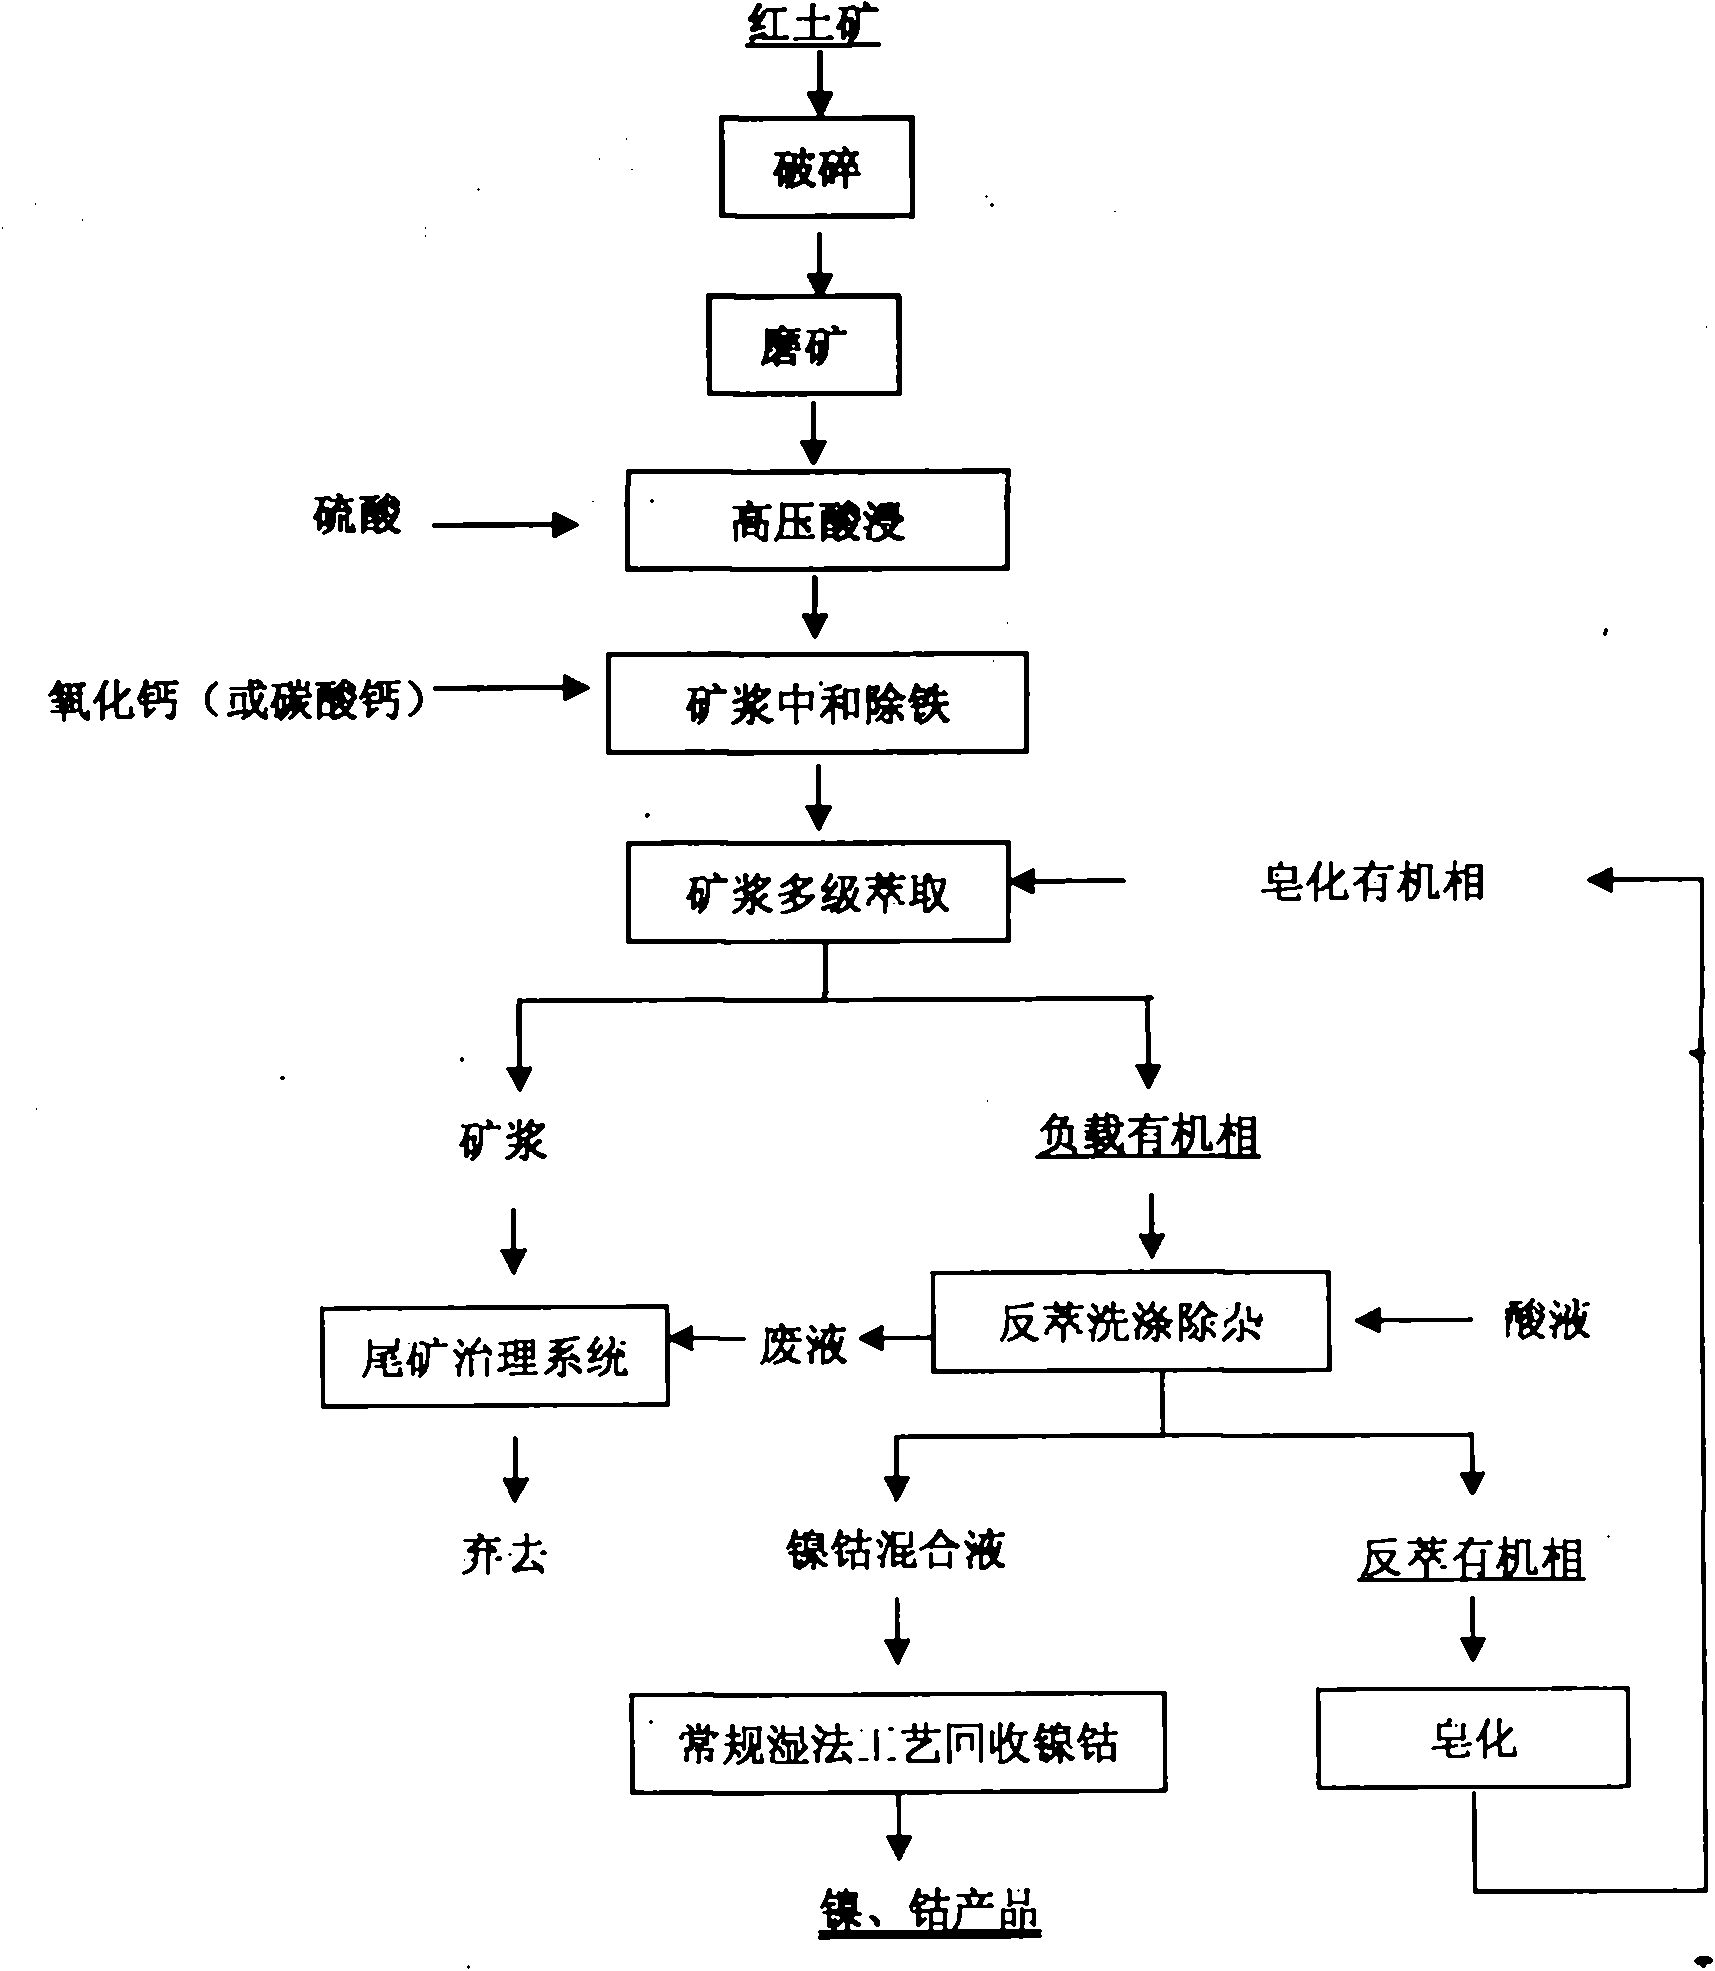 Process for extracting nickel and cobalt from laterite by ore pulp extraction technology